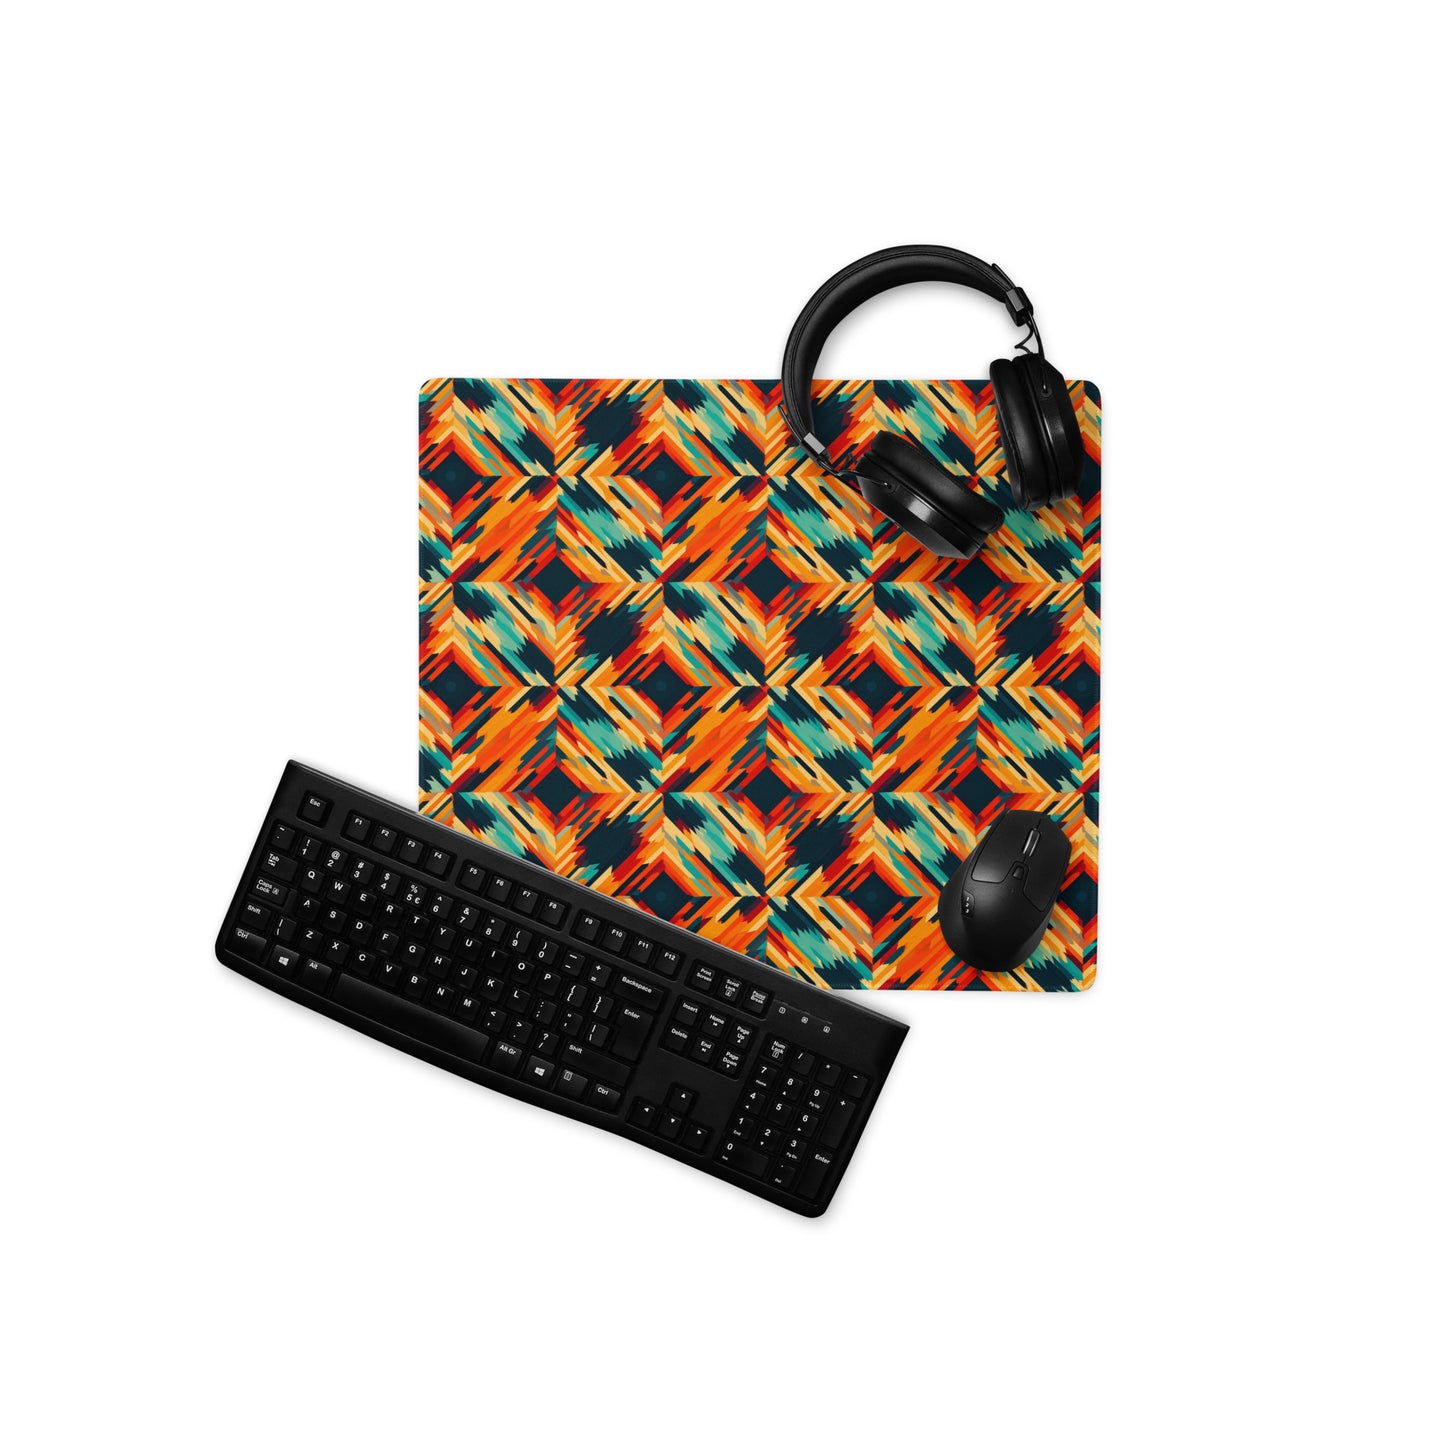 An 18" x 16" desk pad with a tiled abstract pattern on it displayed with a keyboard, headphones and a mouse. Orange in color.